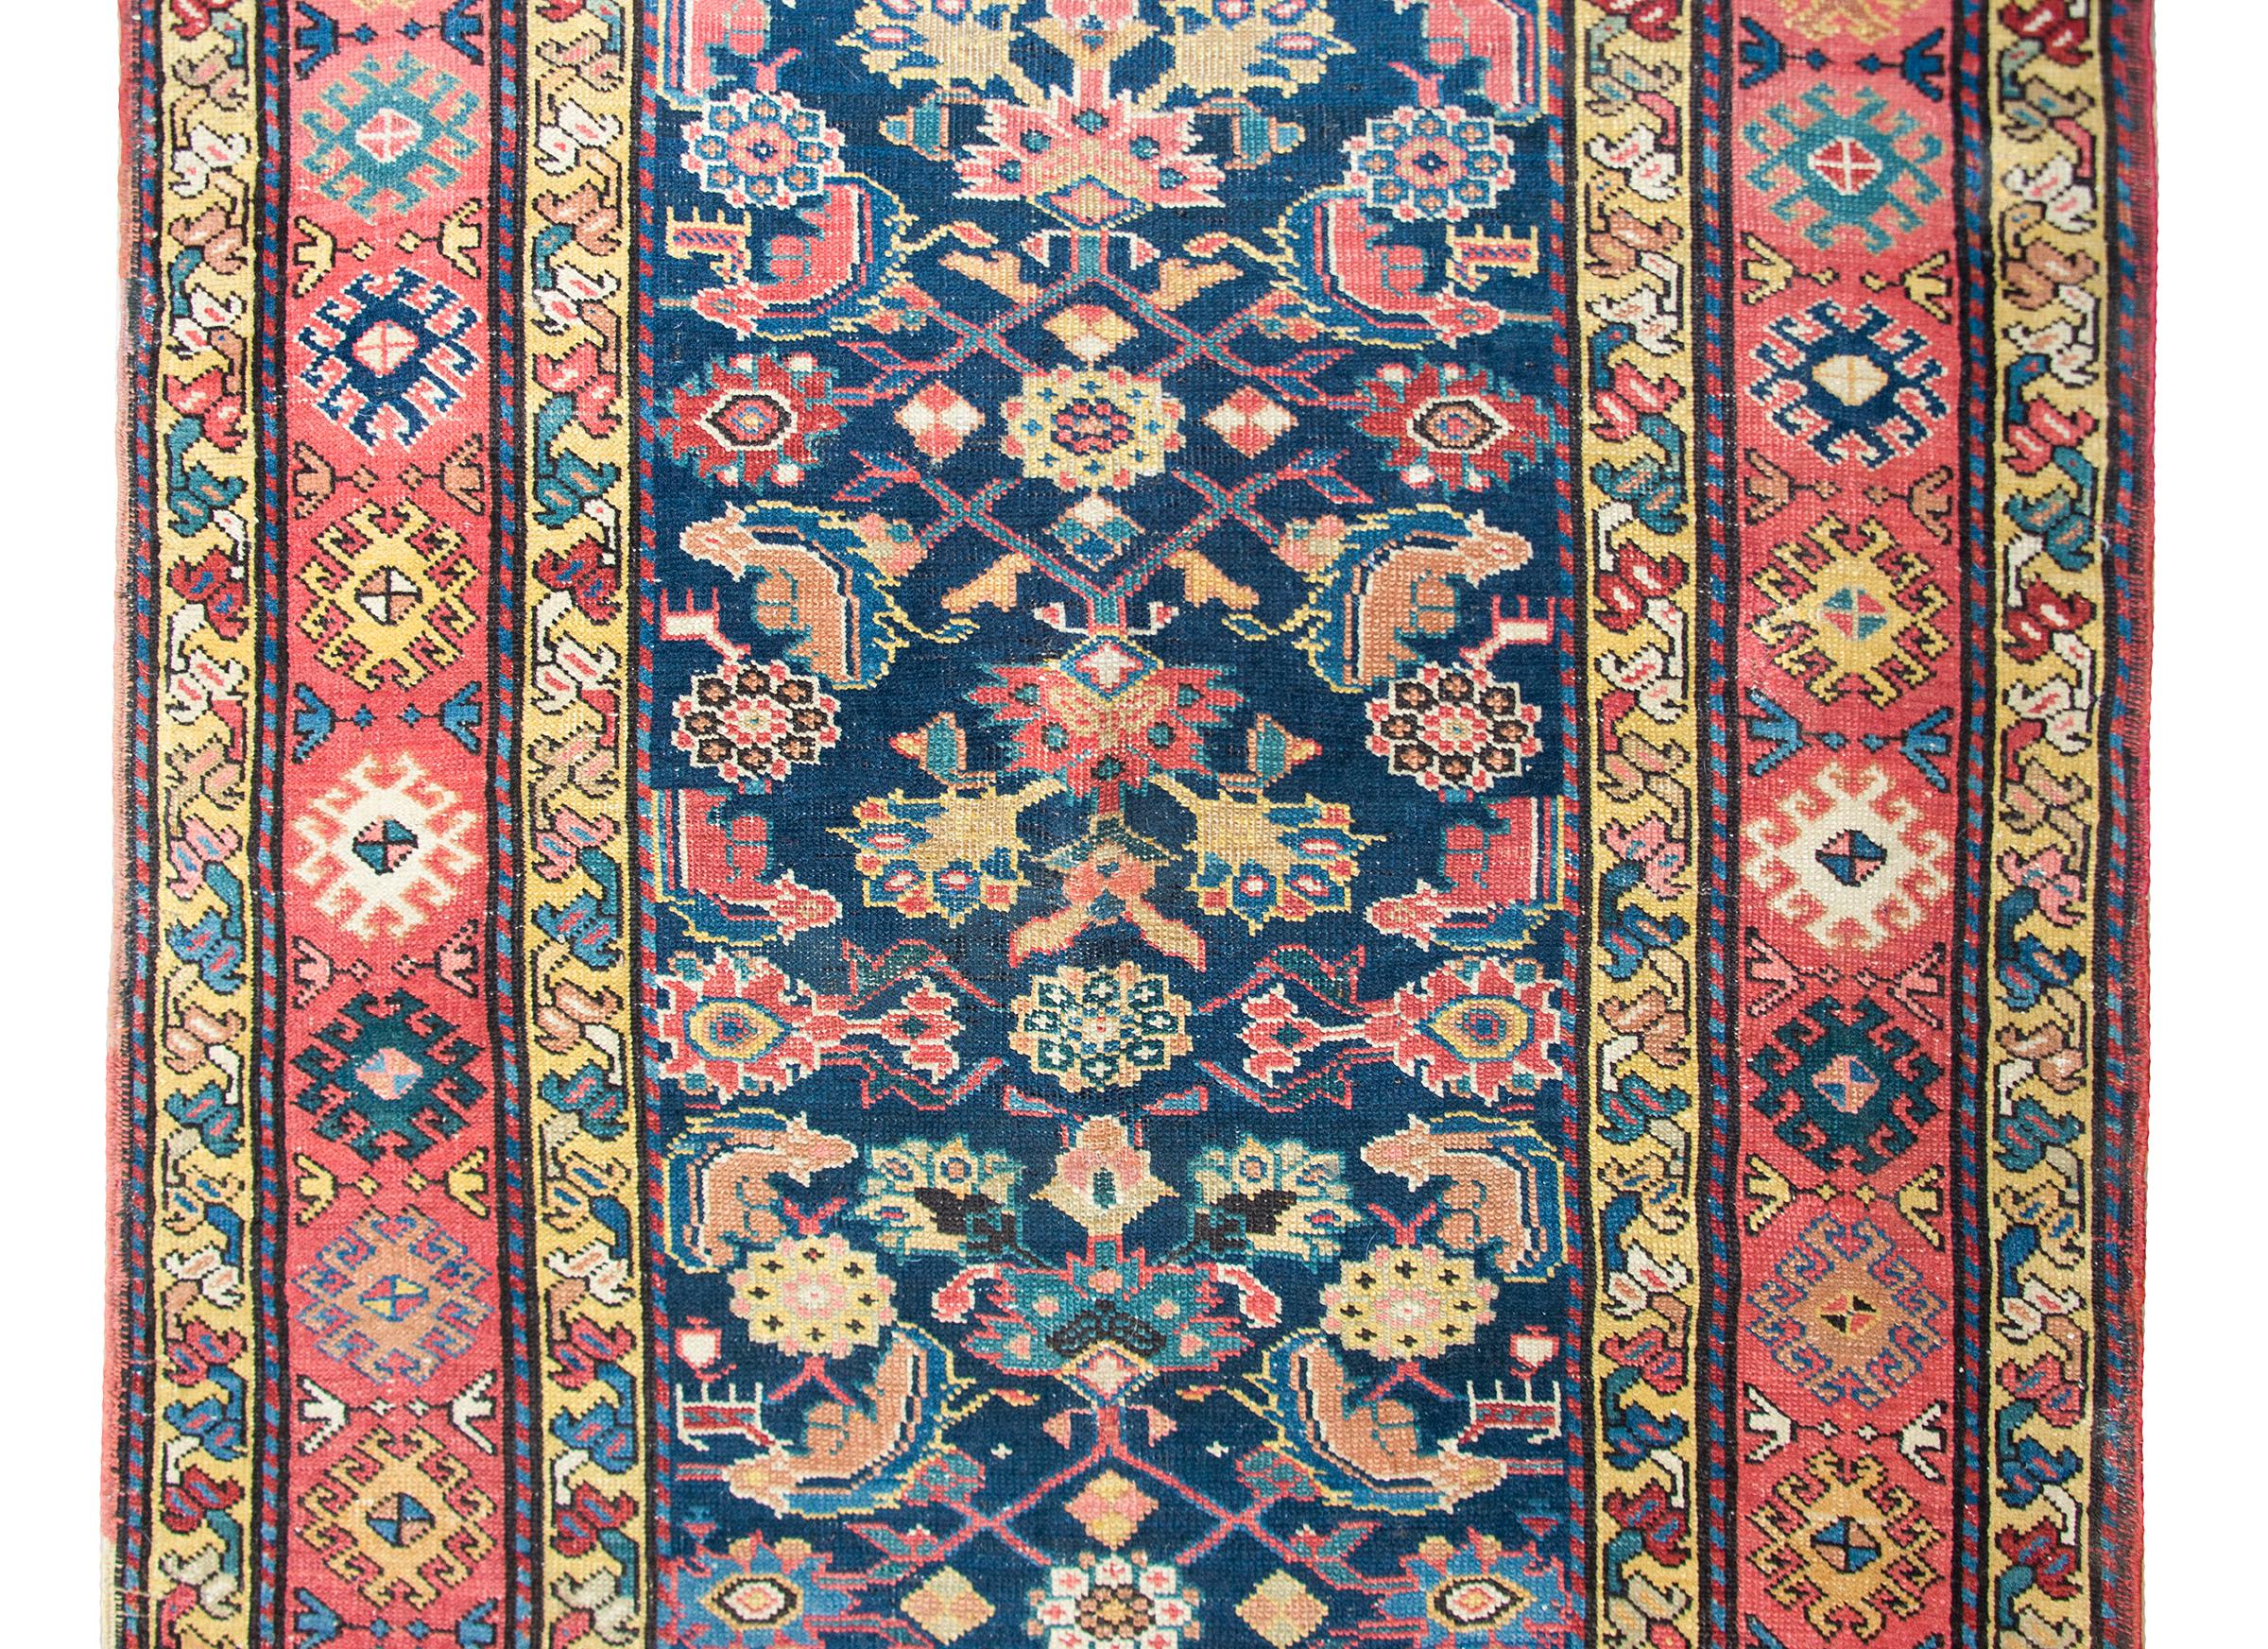 A stunning early 20th century Persian Azari runner with an all-over floral lattice pattern with myriad flowers and animals, surrounded by a wonderful border with a central stylized floral patterned stripe flanked by pairs of petite floral and